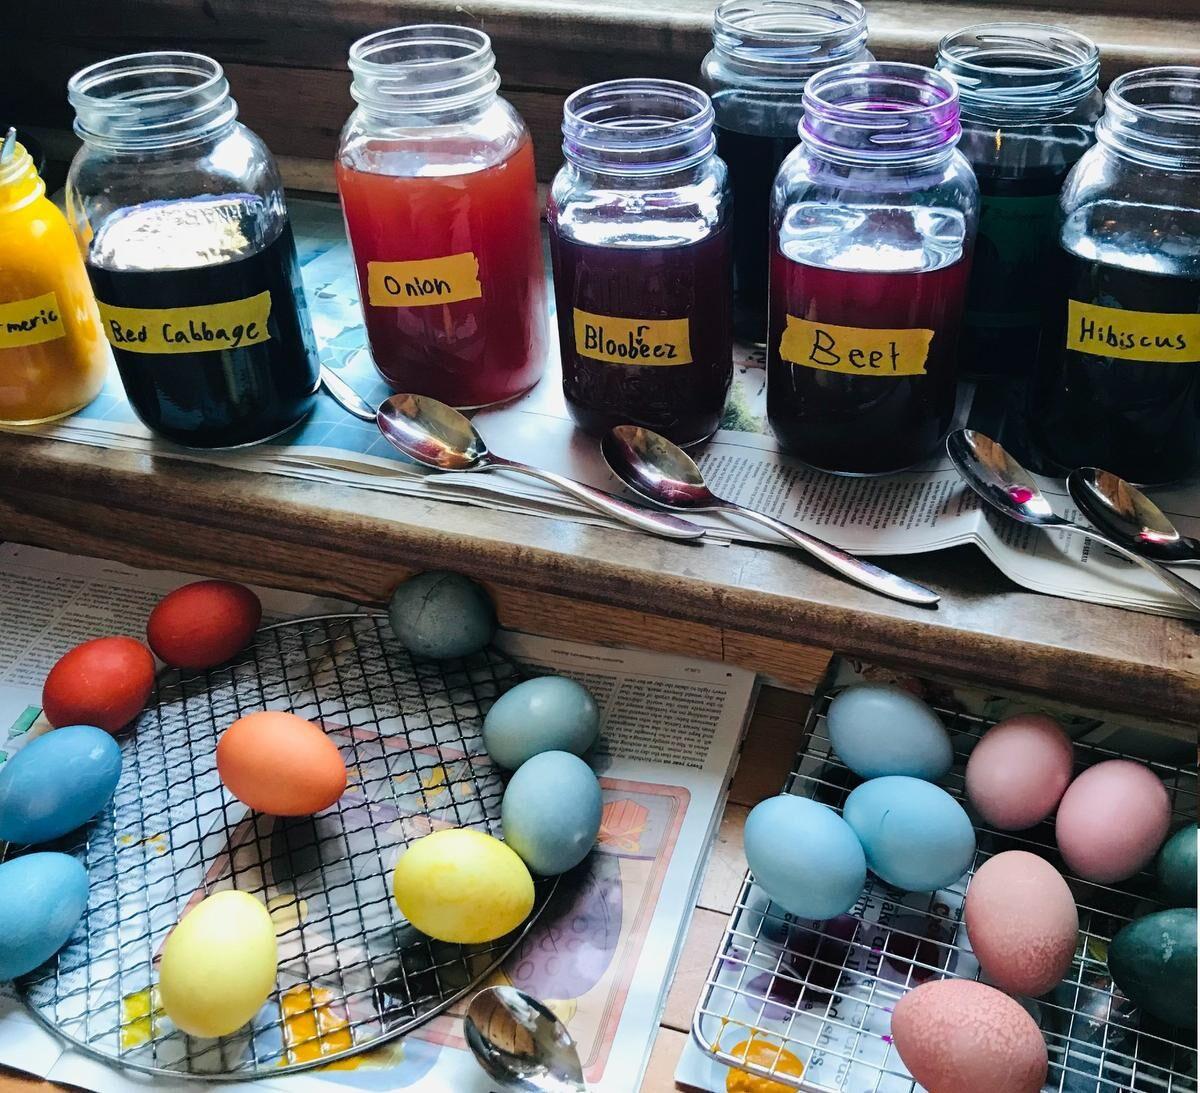 How to dye Easter eggs with natural colouring